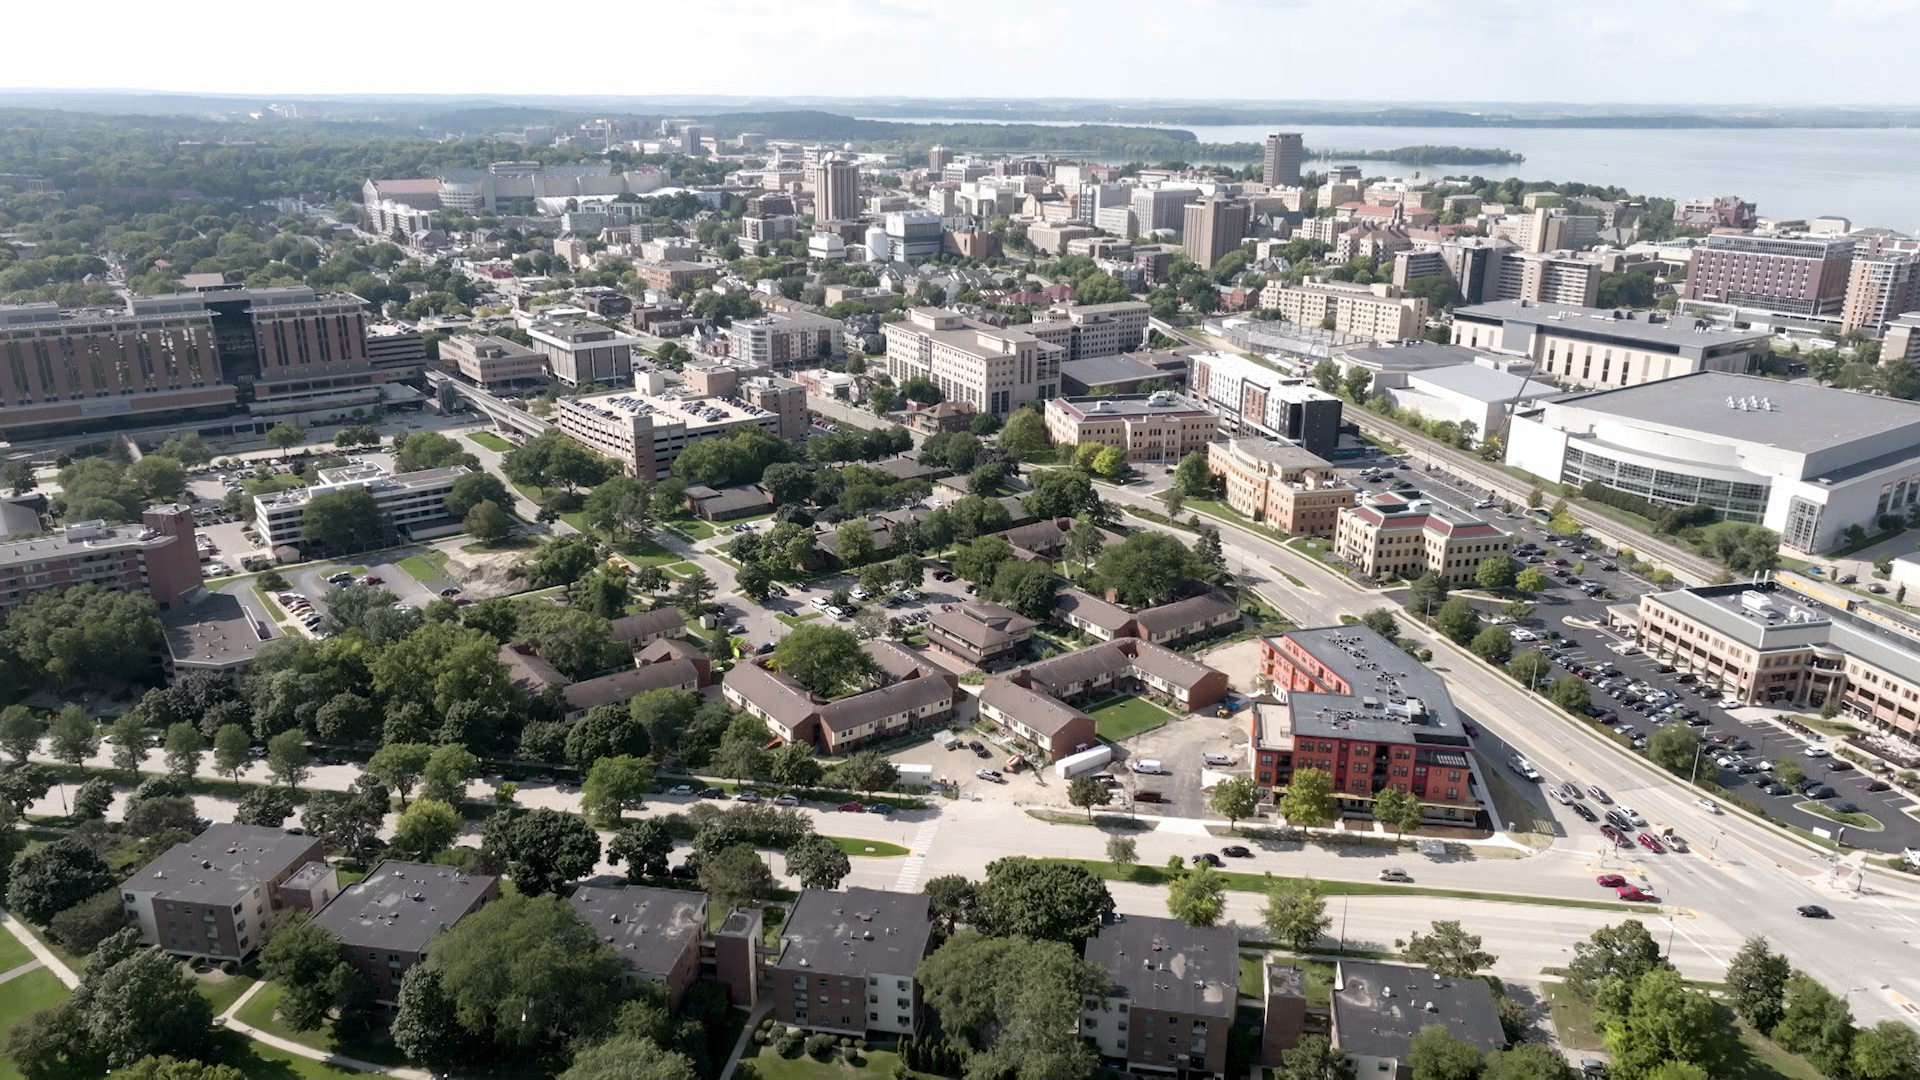 A bird-eye view shows the buildings, roads and trees that make up the streetscape of Madison's Triangle neighborhood and adjacent urbanized areas with large buildings with a portion of a lake in the background.